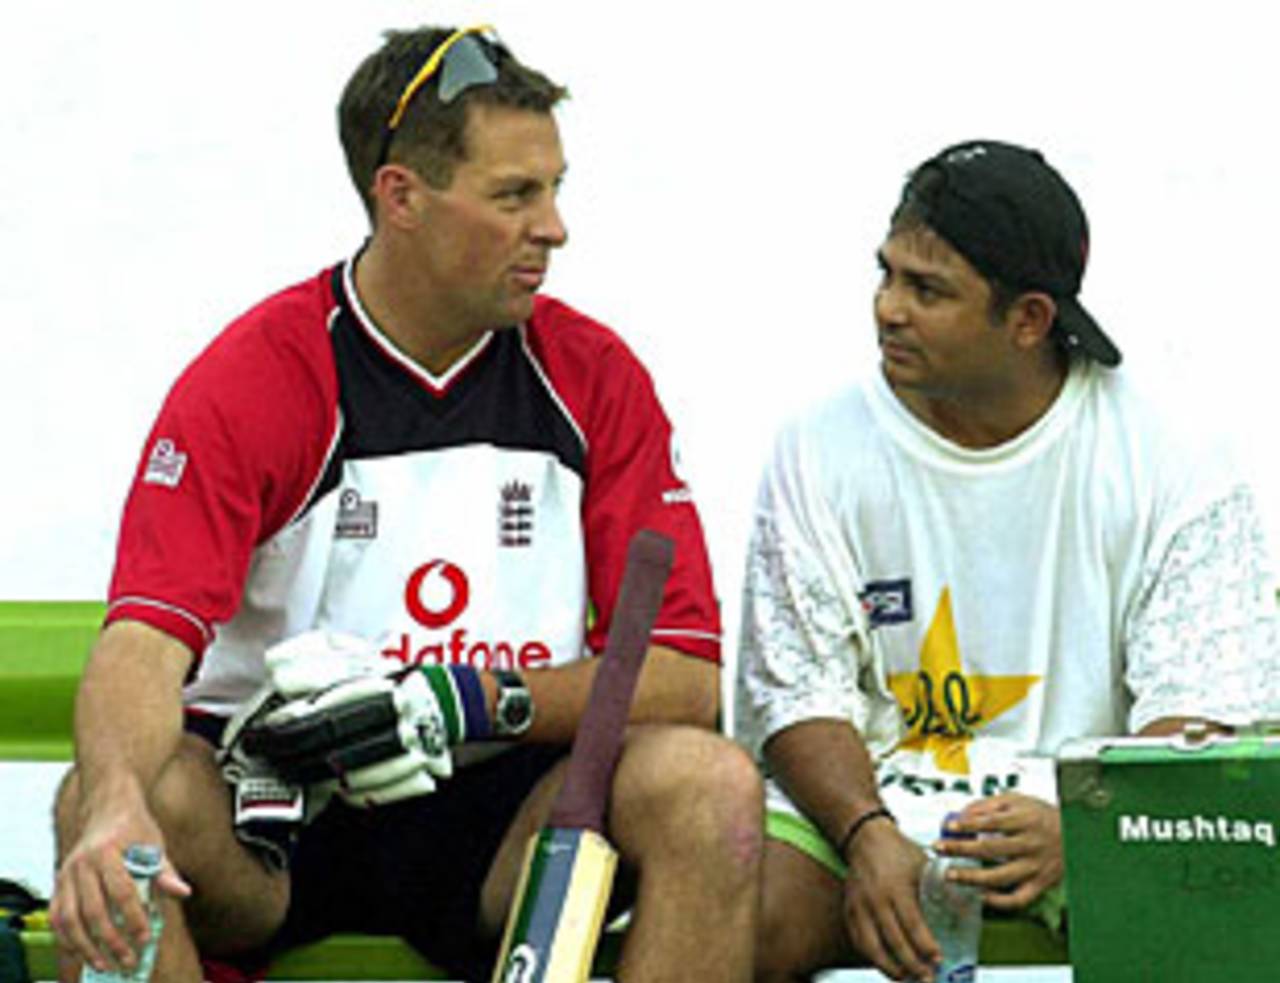 Marcus Trescothick and Mushtaq Ahmed chat during a training session, Karachi, October 23, 2000